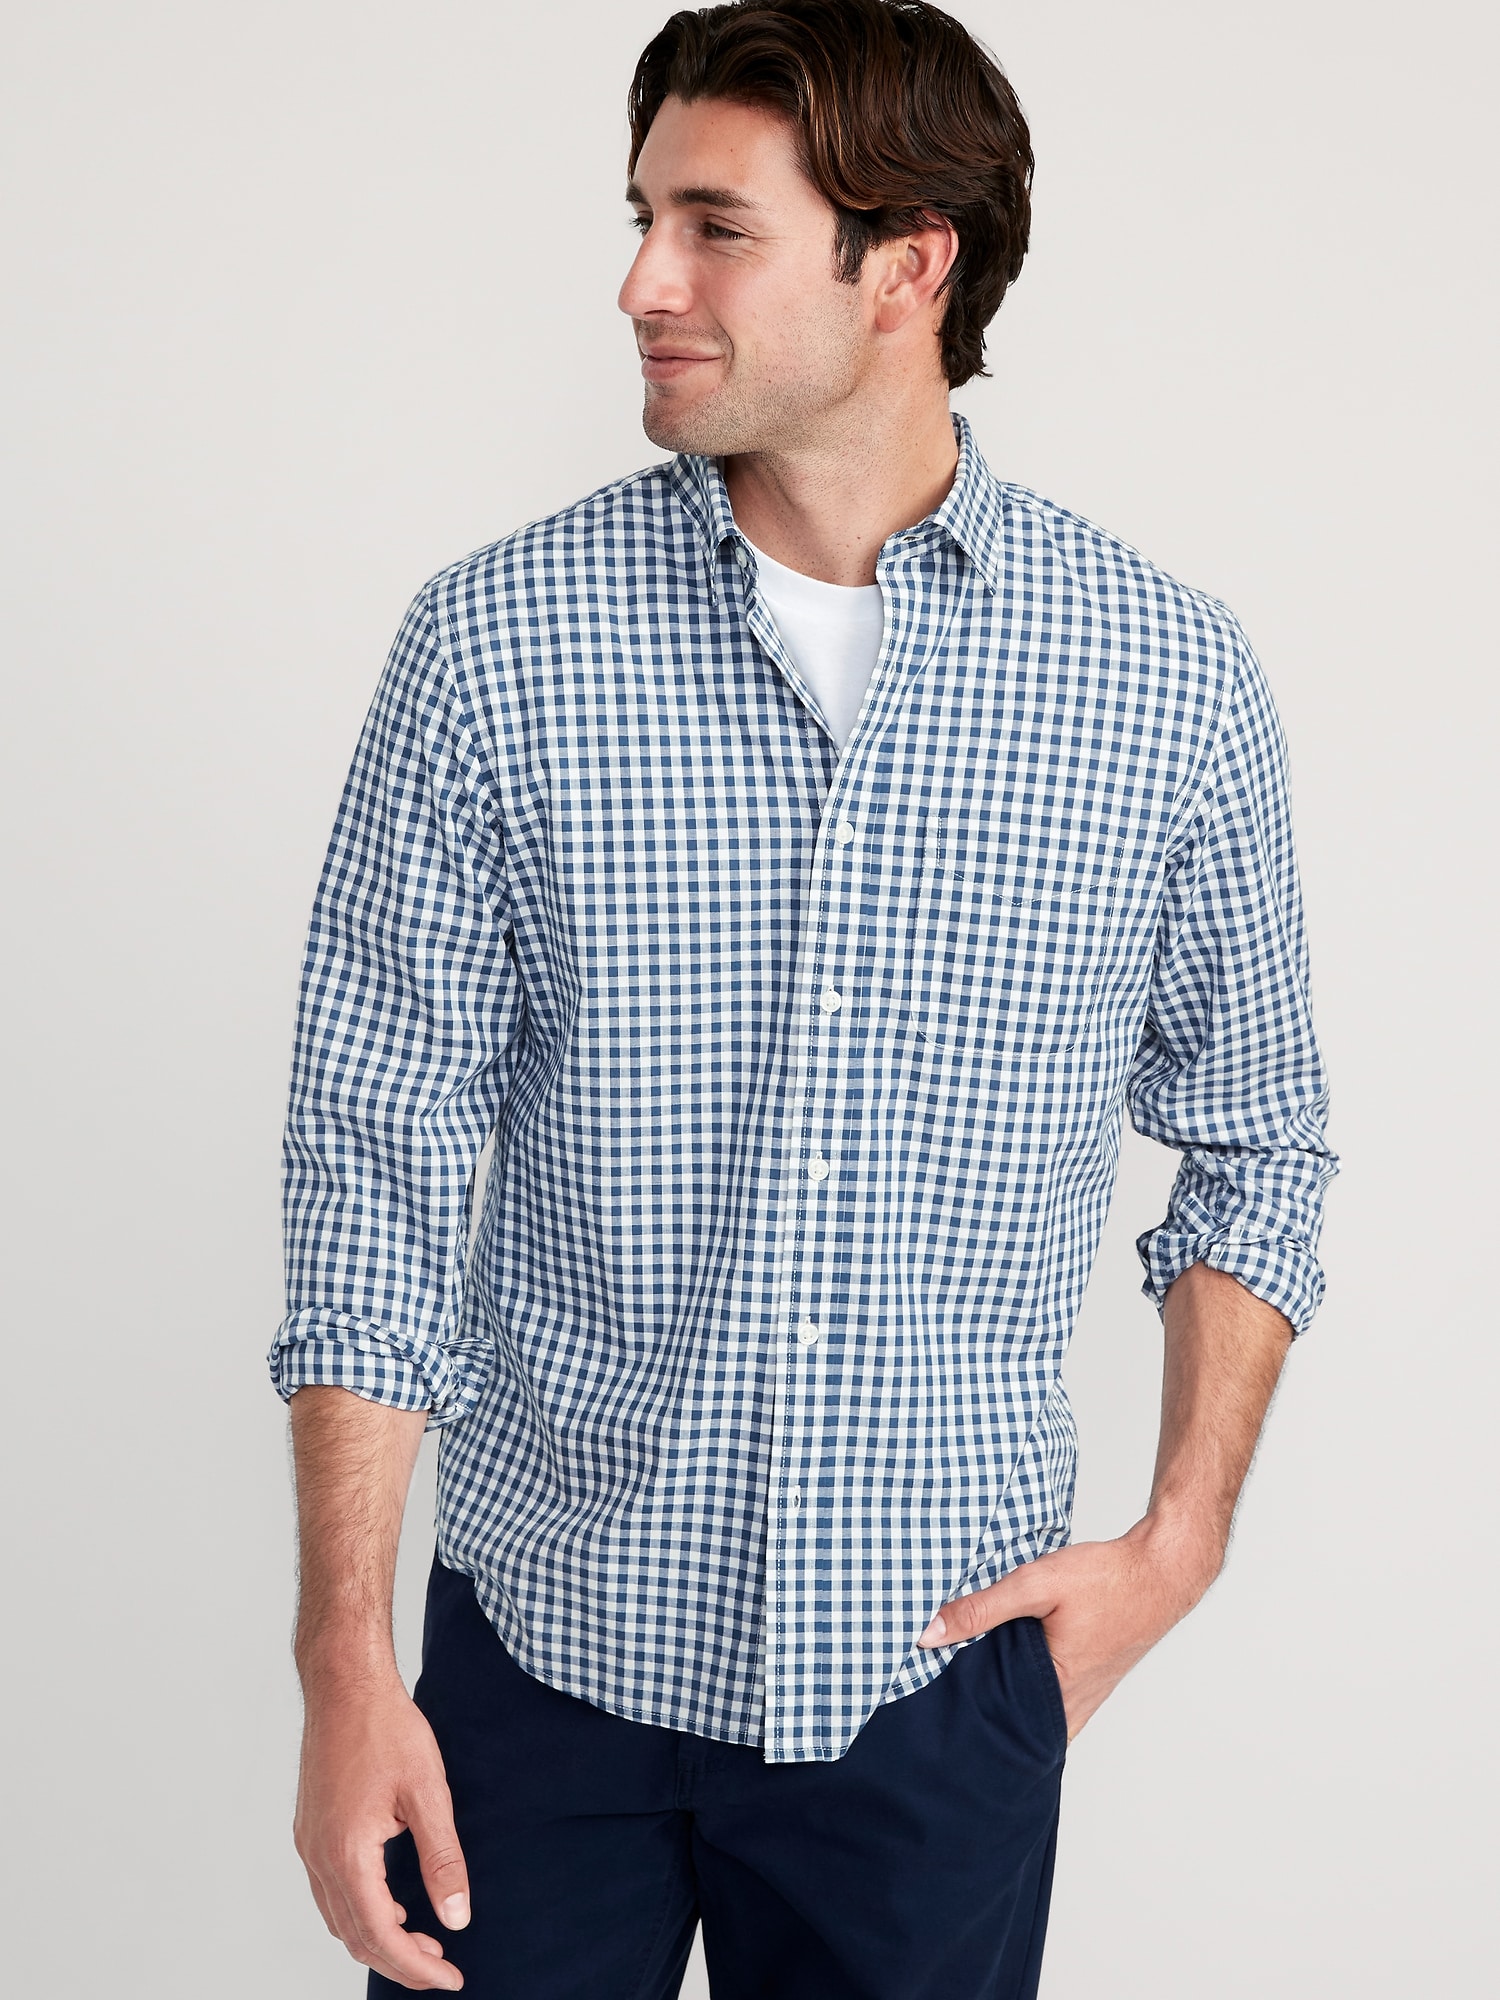 Classic-Fit Everyday Shirt for Men | Old Navy